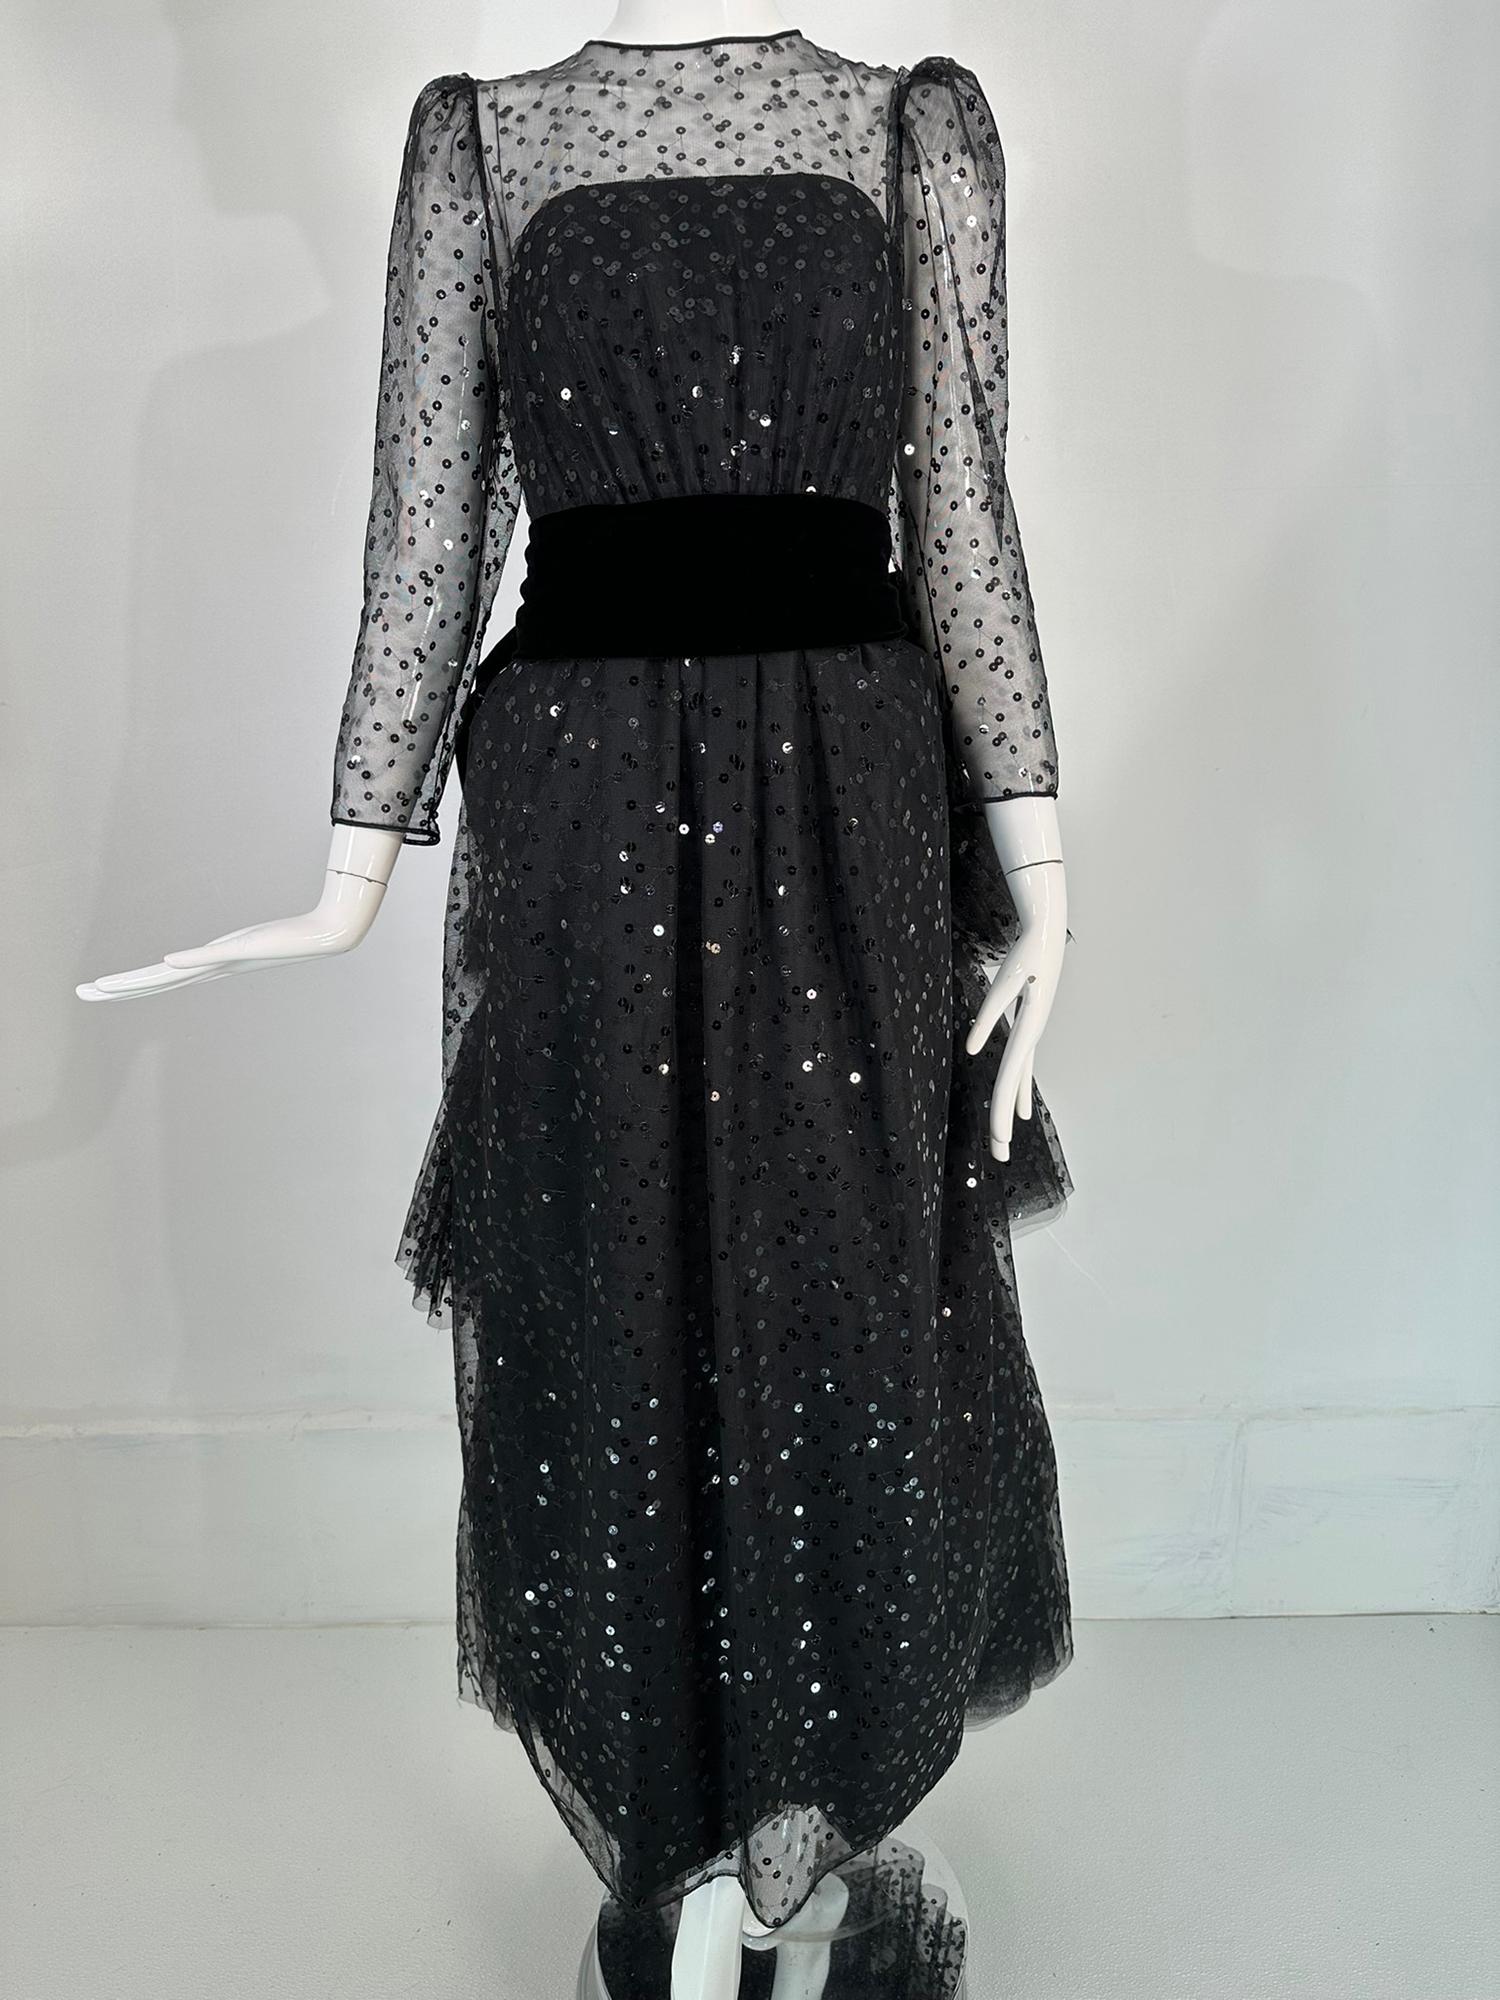 John Anthony sequined black tulle, black rose bustle back evening gown from the 1980s. Corset bodice fully boned and lined inside, the outer bodice is a sequined sheer back tulle, jewel neckline, long sleeve attached top, it closes at the back with